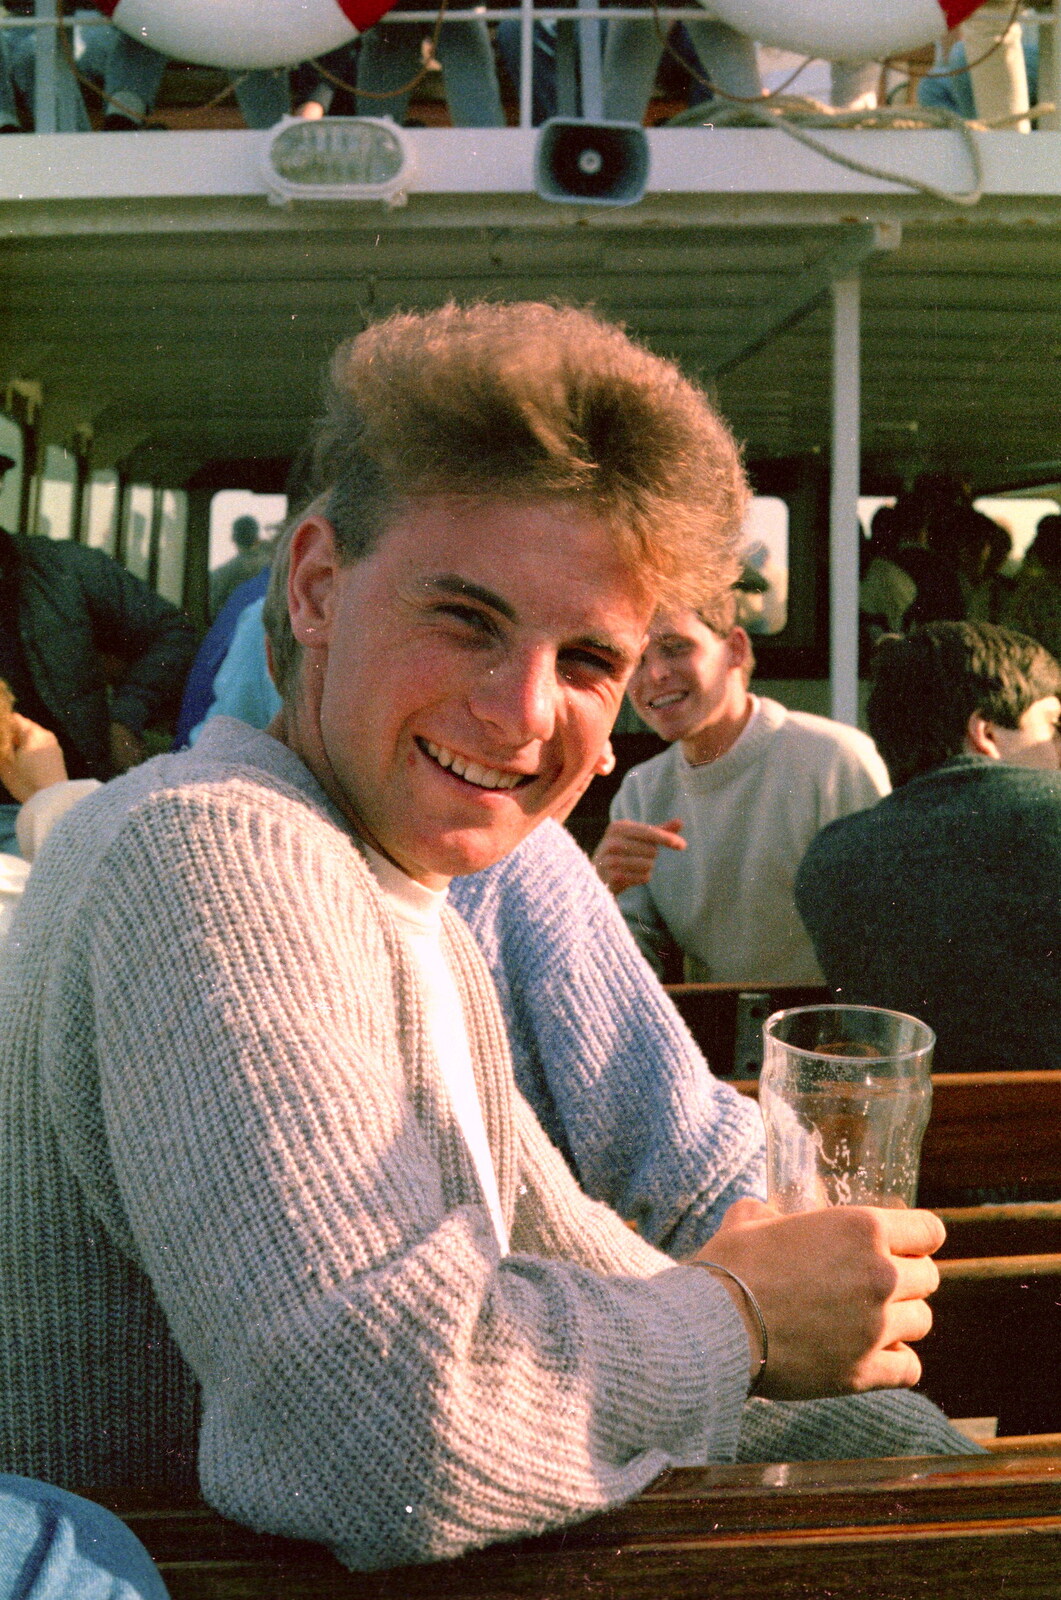 Malc again from Uni: A Student Booze Cruise, Plymouth Sound, Devon - 2nd May 1986